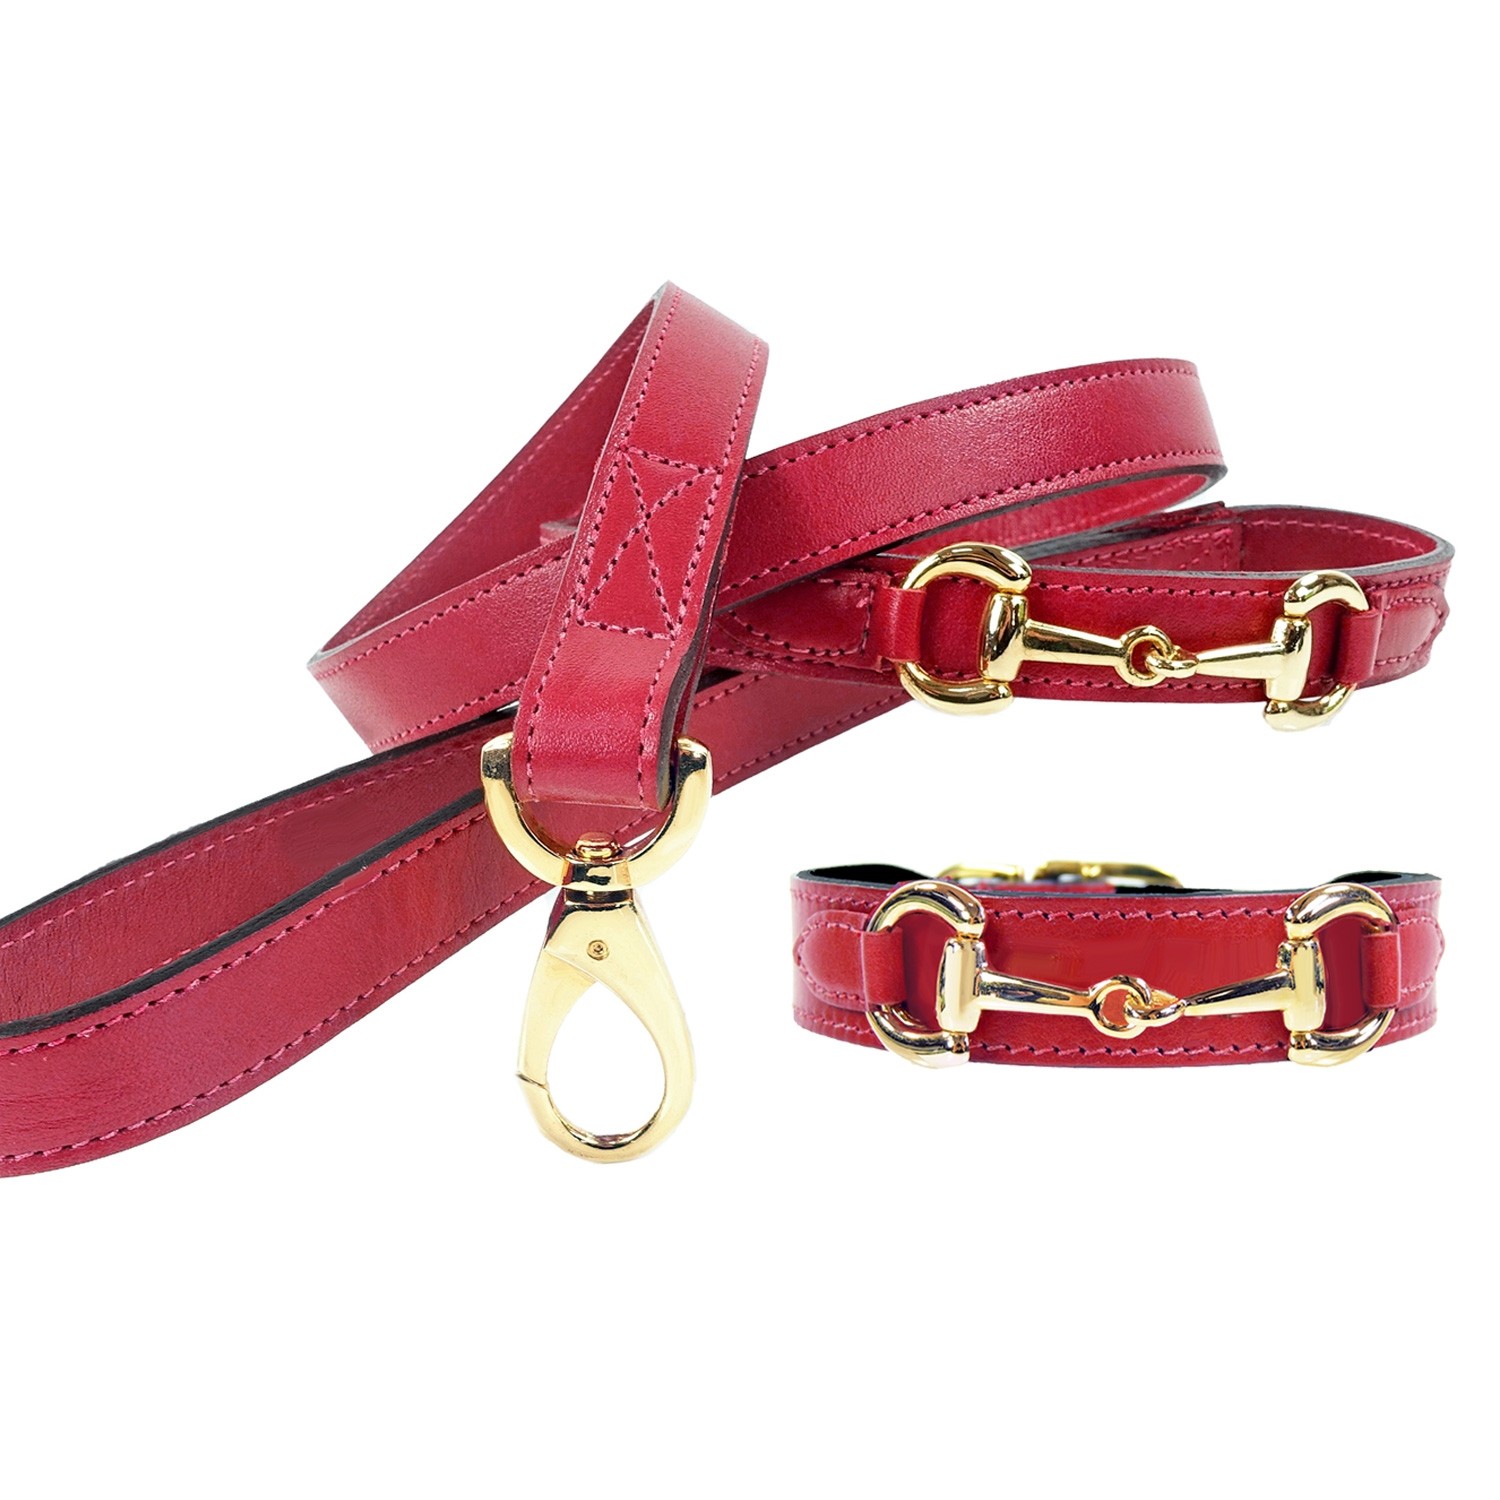 Gucci Poochie Italian Leather Dog Collar - Sweet Pink